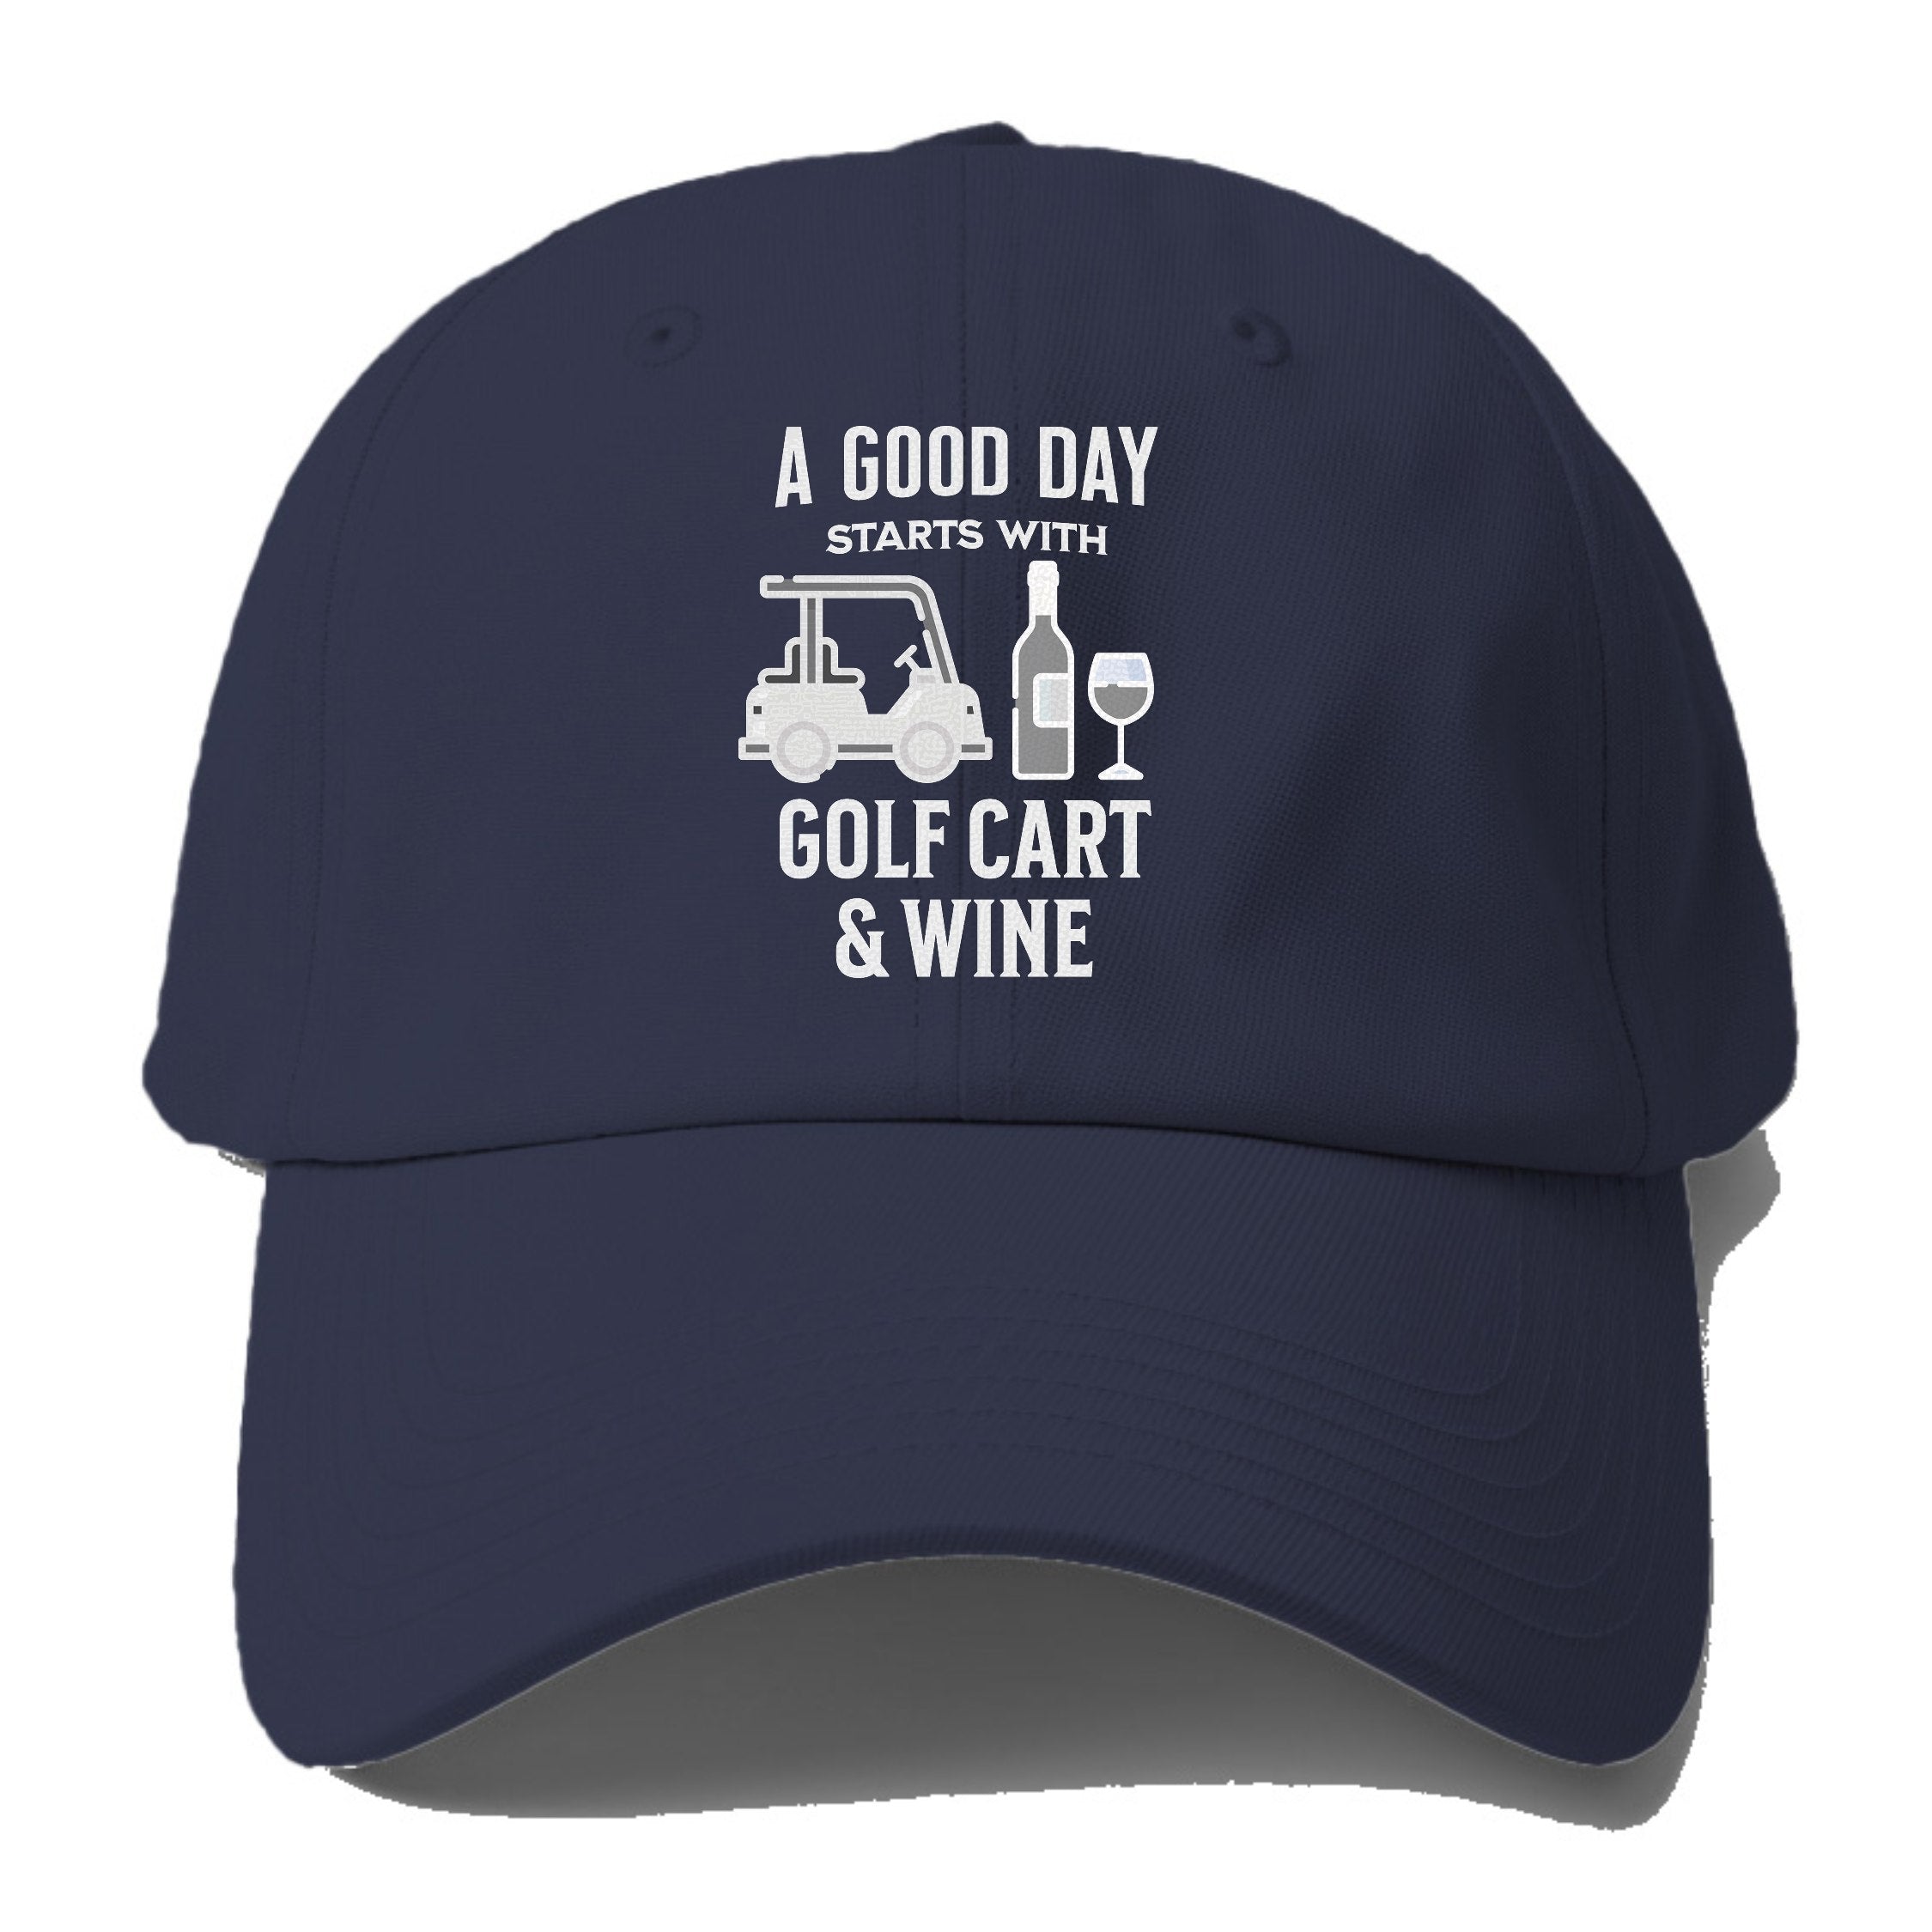 A Good Day Starts With Golf Cart & Wine Baseball Cap For Big Heads